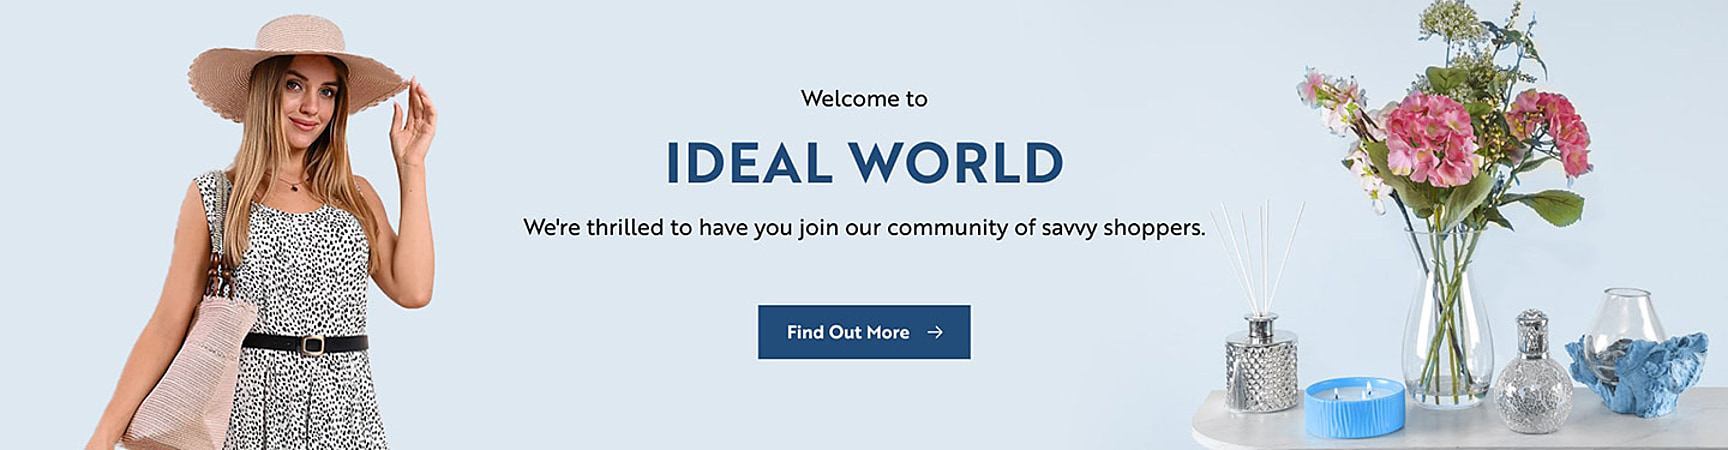 Welcome to Ideal World